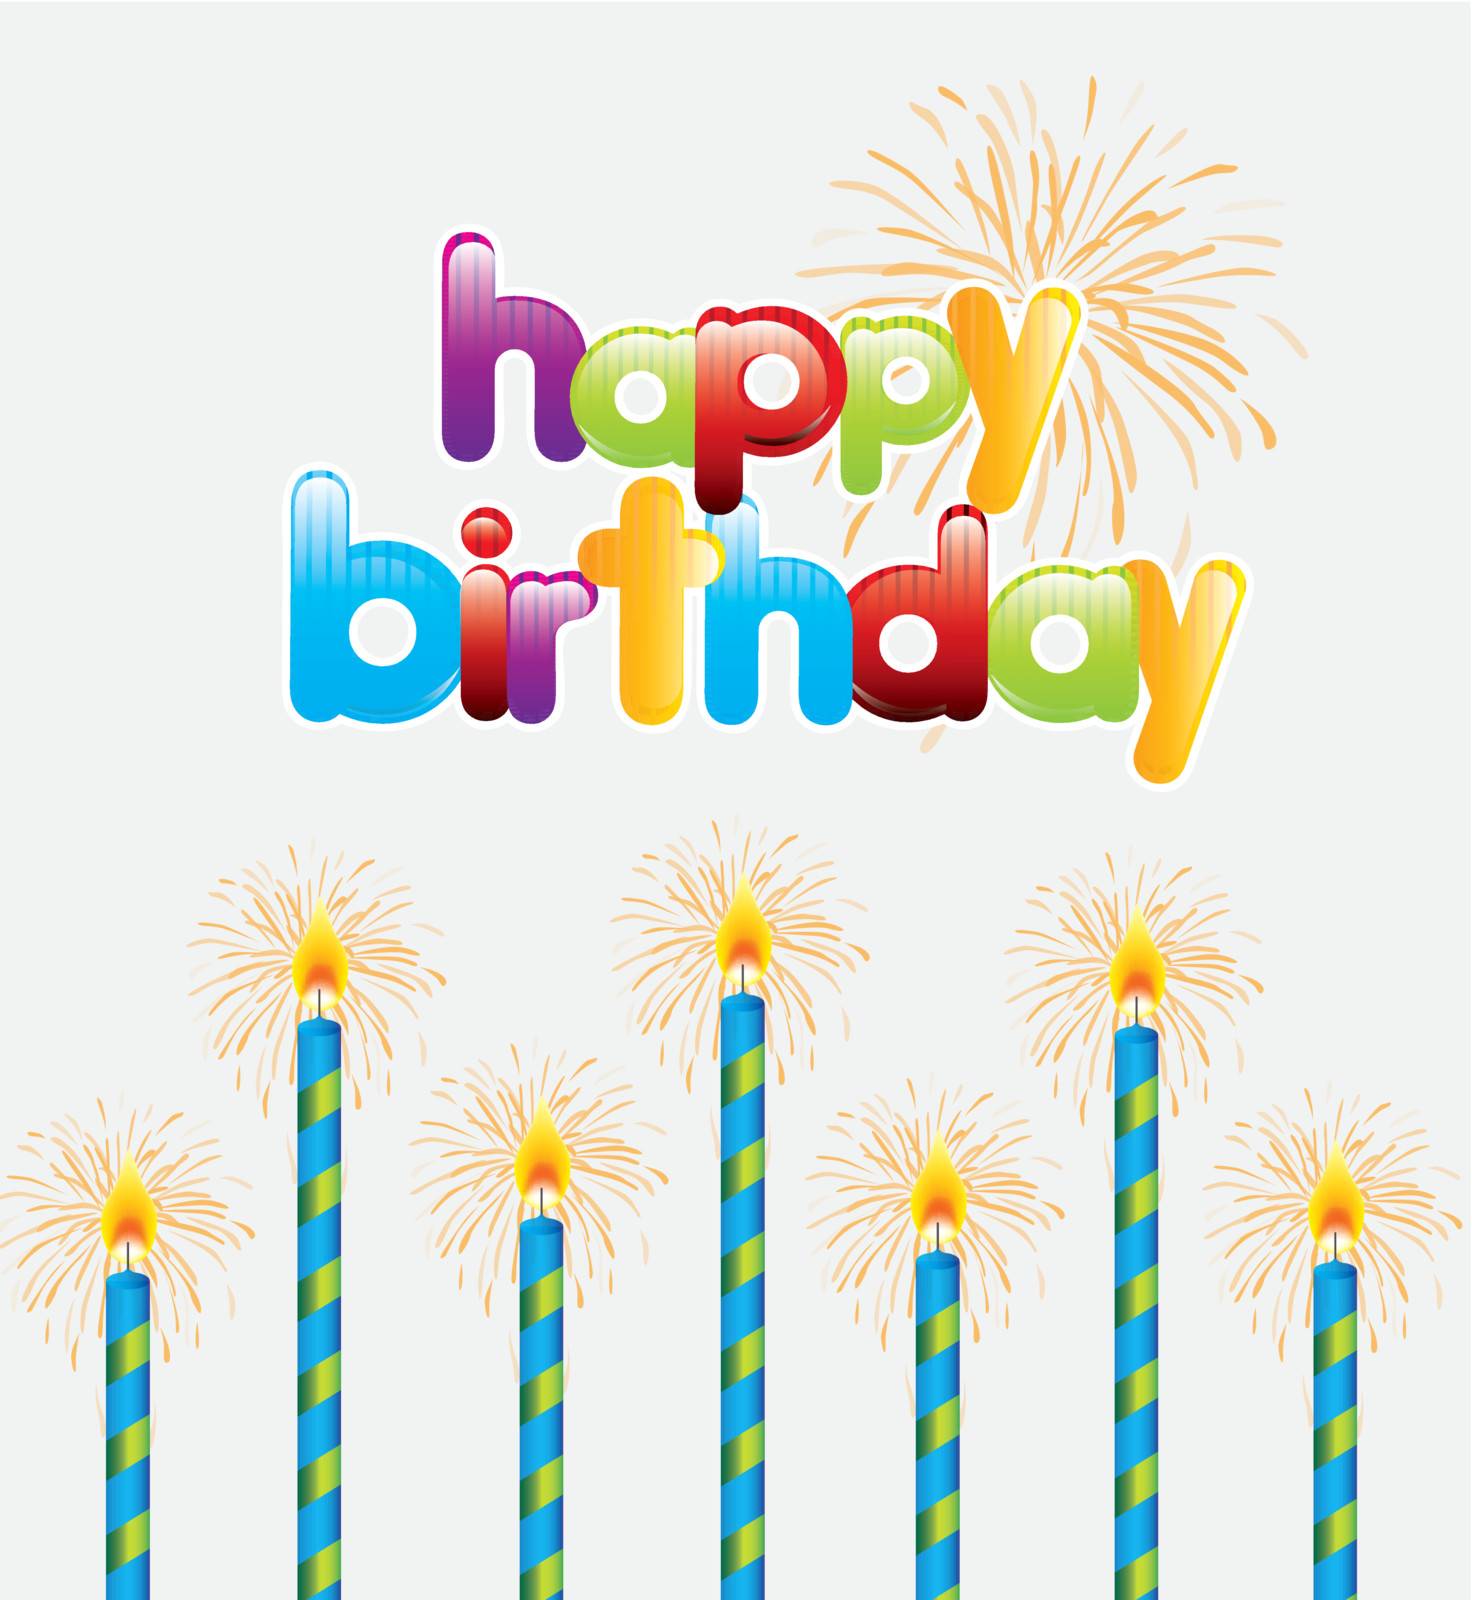 Happy Birthday card over white background vector illustration 